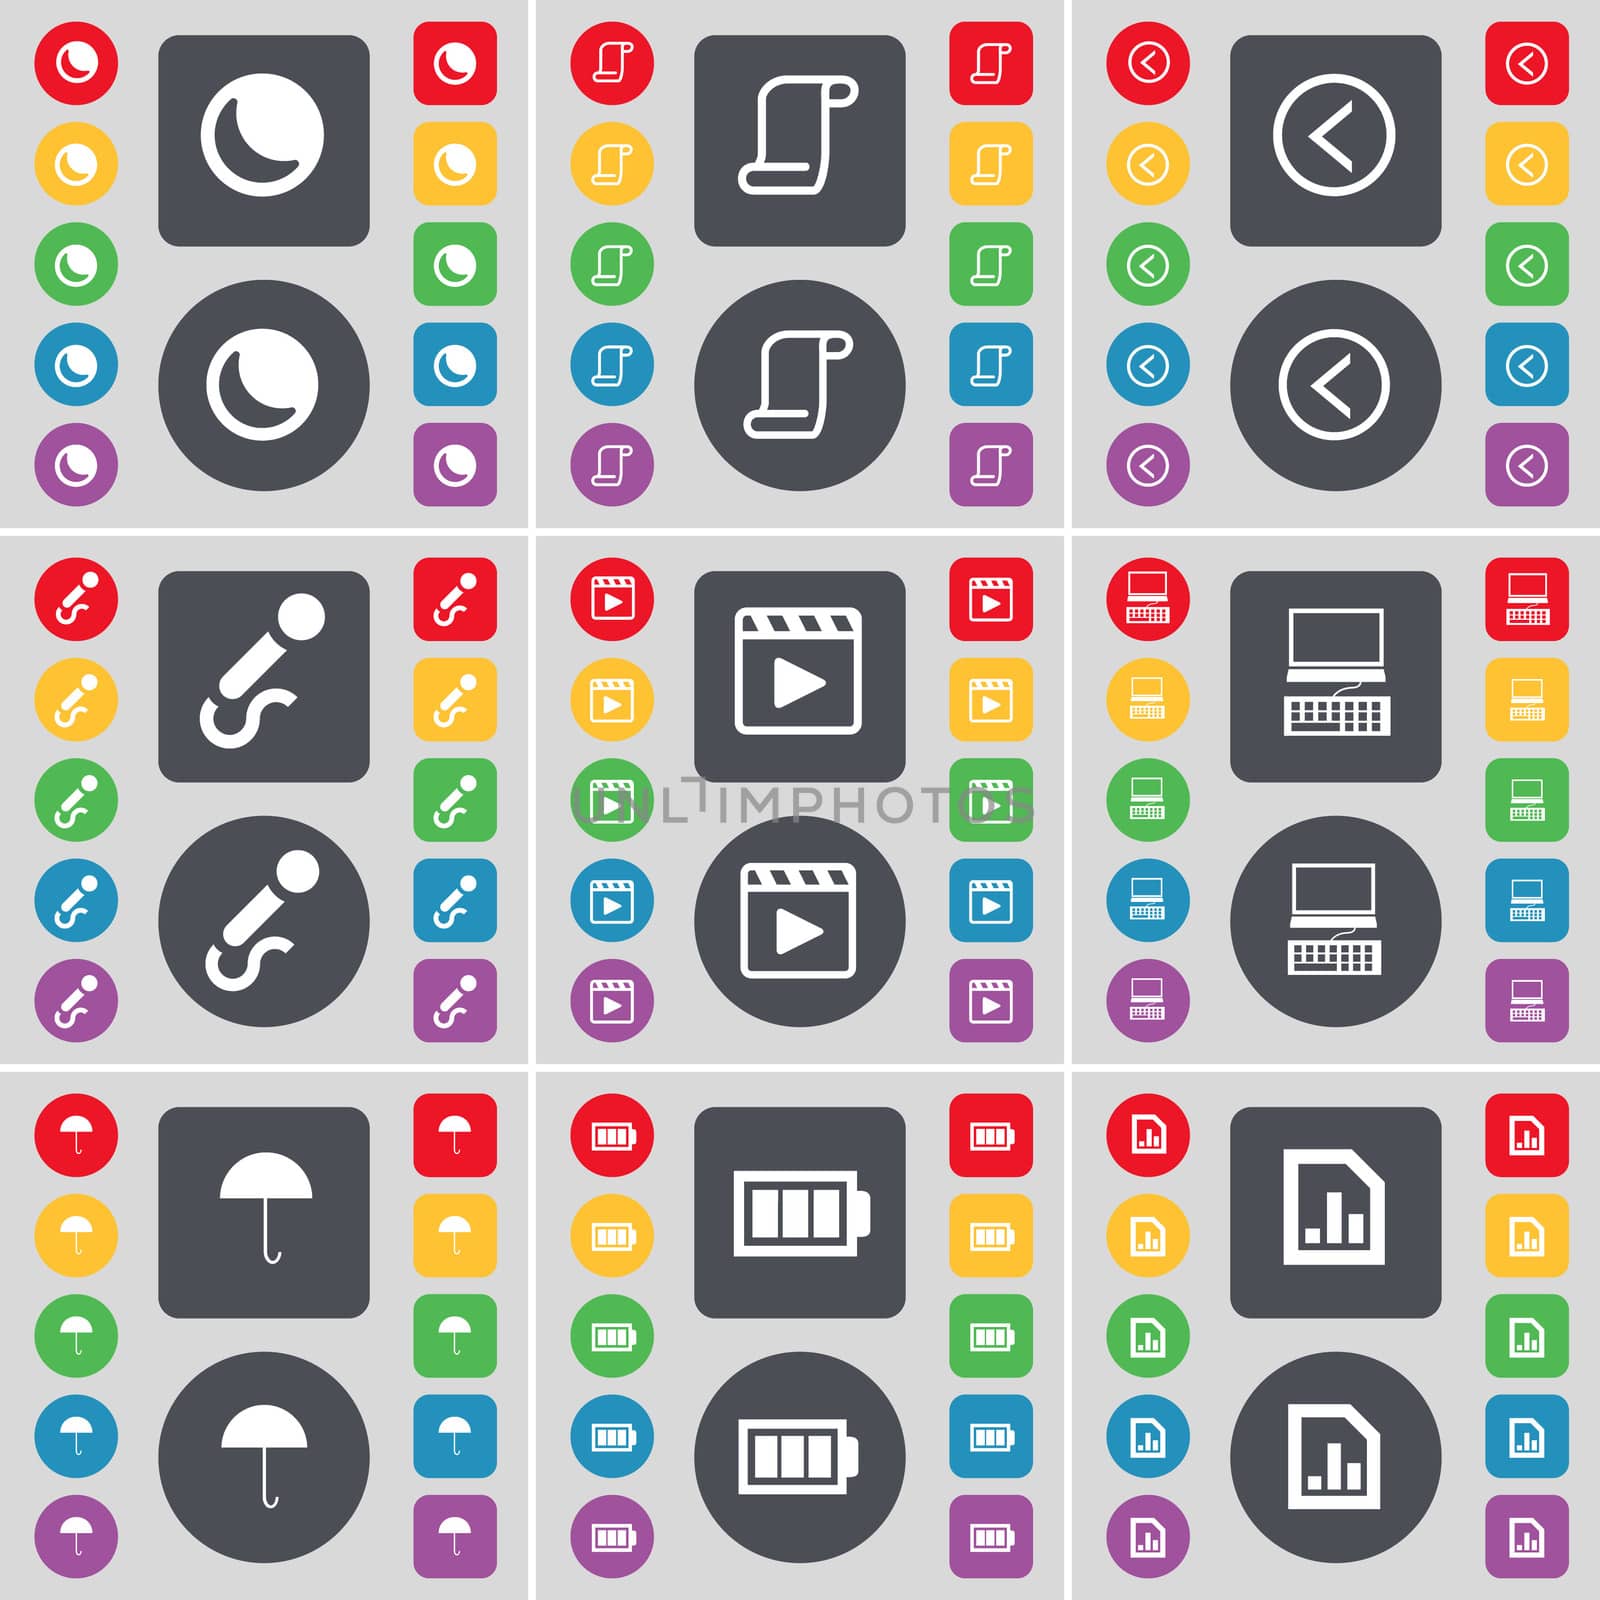 Moon, Scroll, Arrow left, Microphone, Media player, Laptop, Umbrella, Battery, Diagram file icon symbol. A large set of flat, colored buttons for your design. illustration